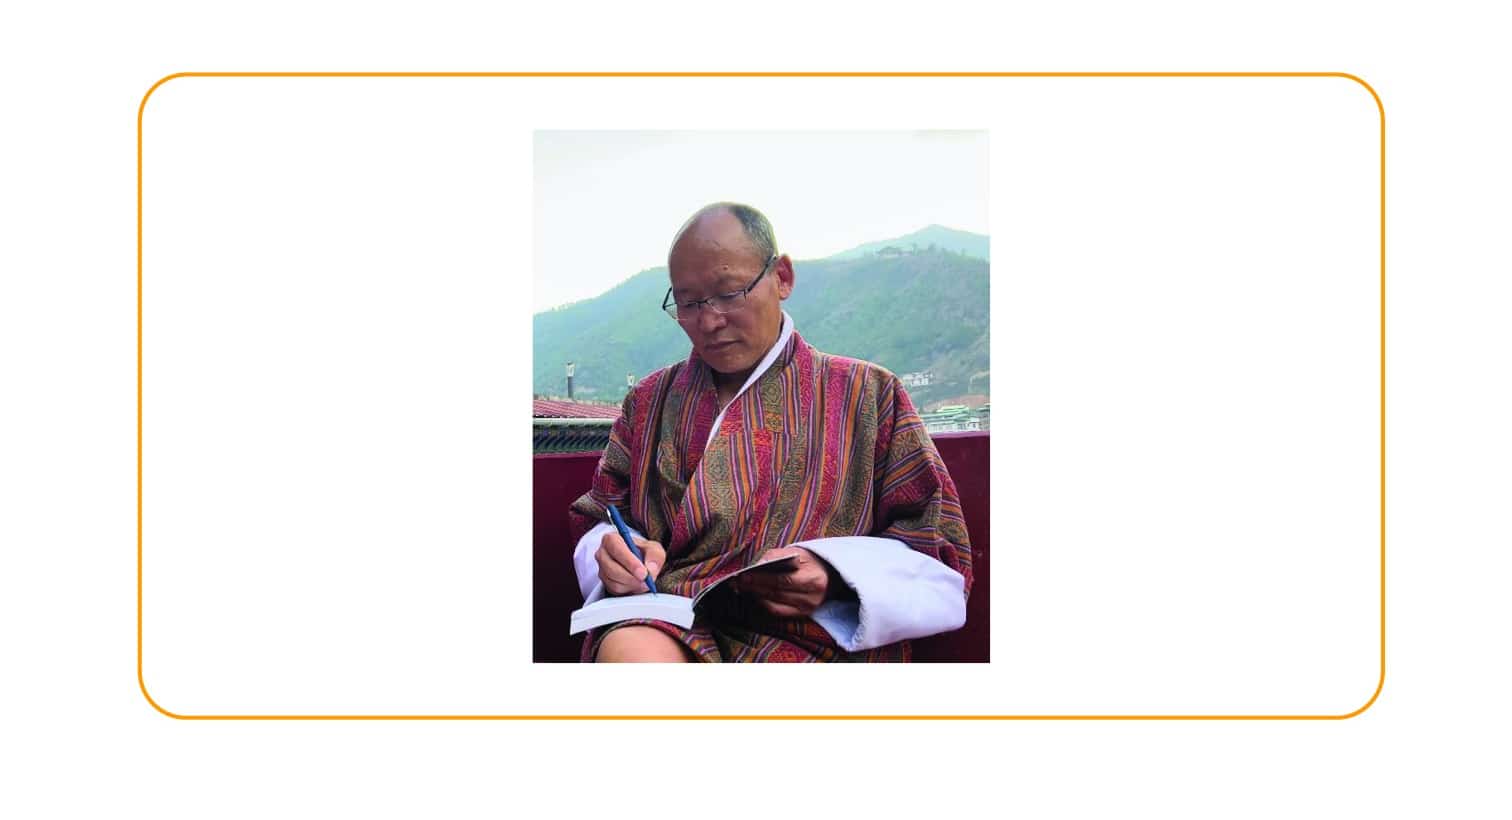 Bhutan: The Unremembered Nation launched